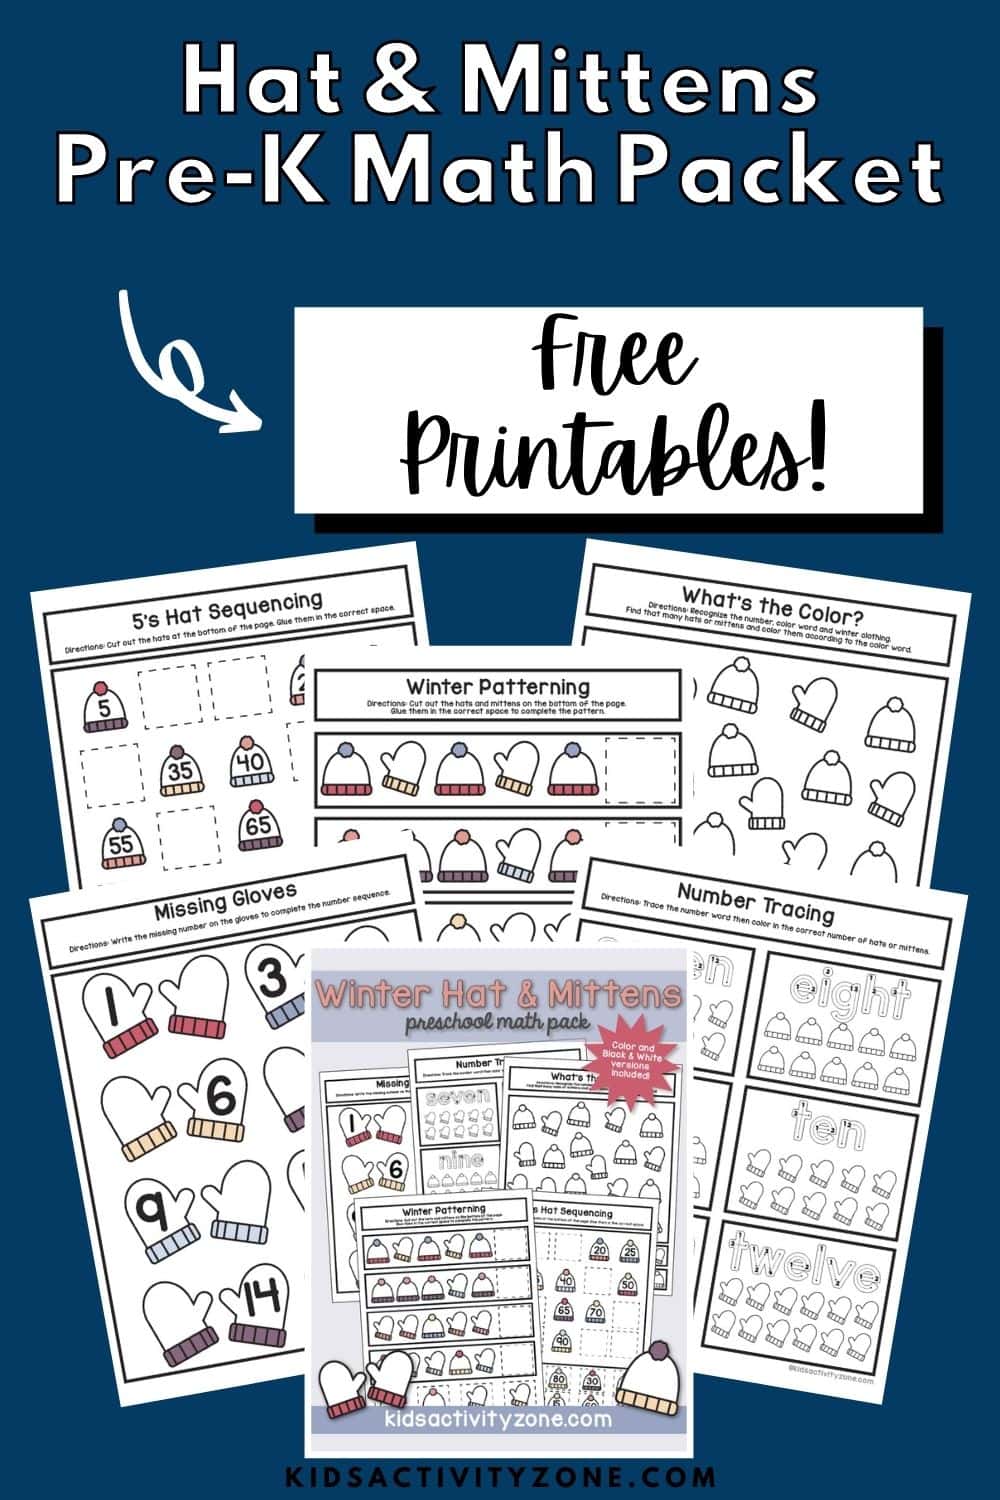 Free Hat & Mittens Preschool Math Packet Printables are great fun and engaging perfect for young children. They will practice coloring, number recognition, counting and more! Free download for at home or use in your classroom!